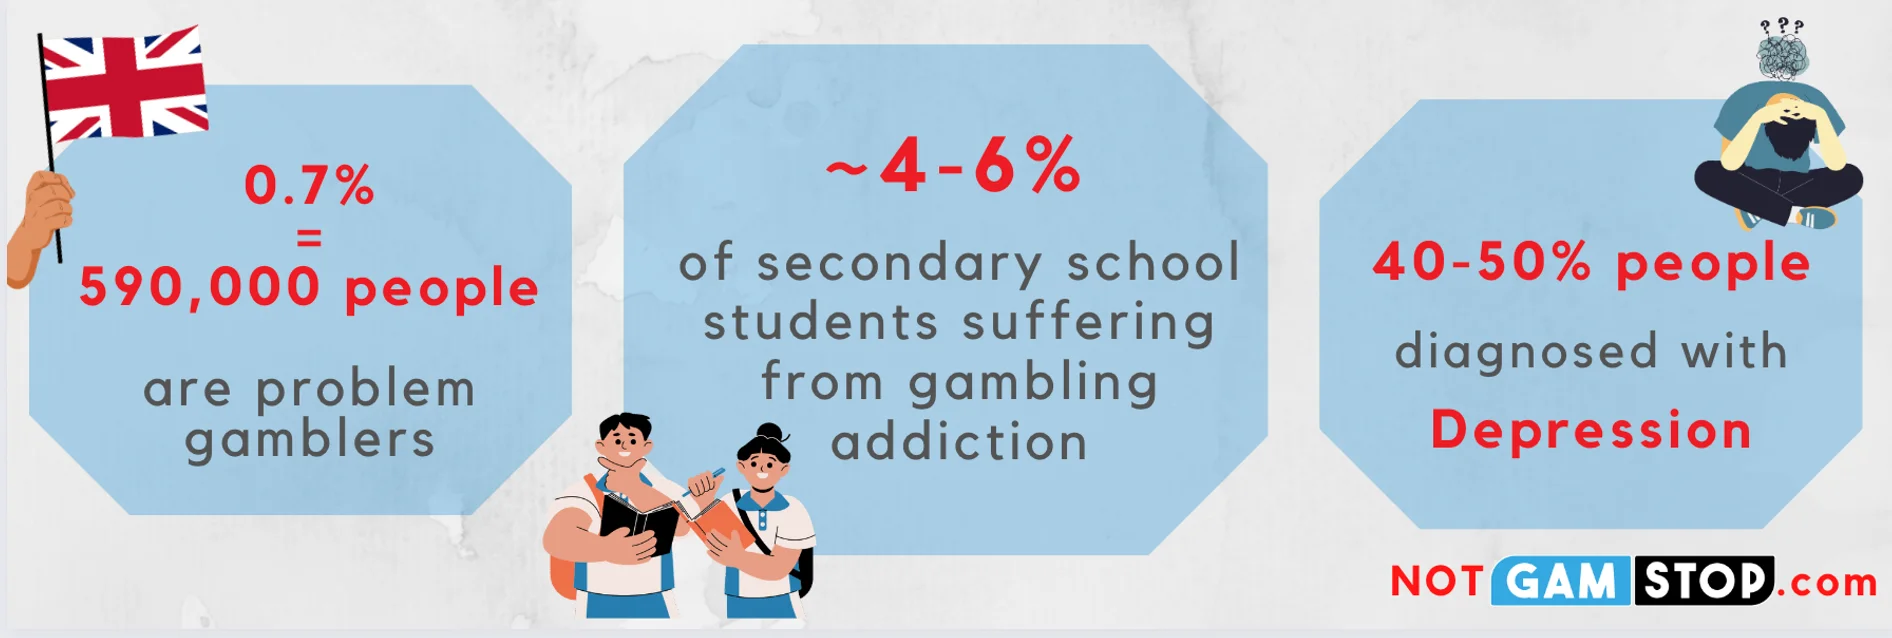 Level of gambling addiction problems in the UK